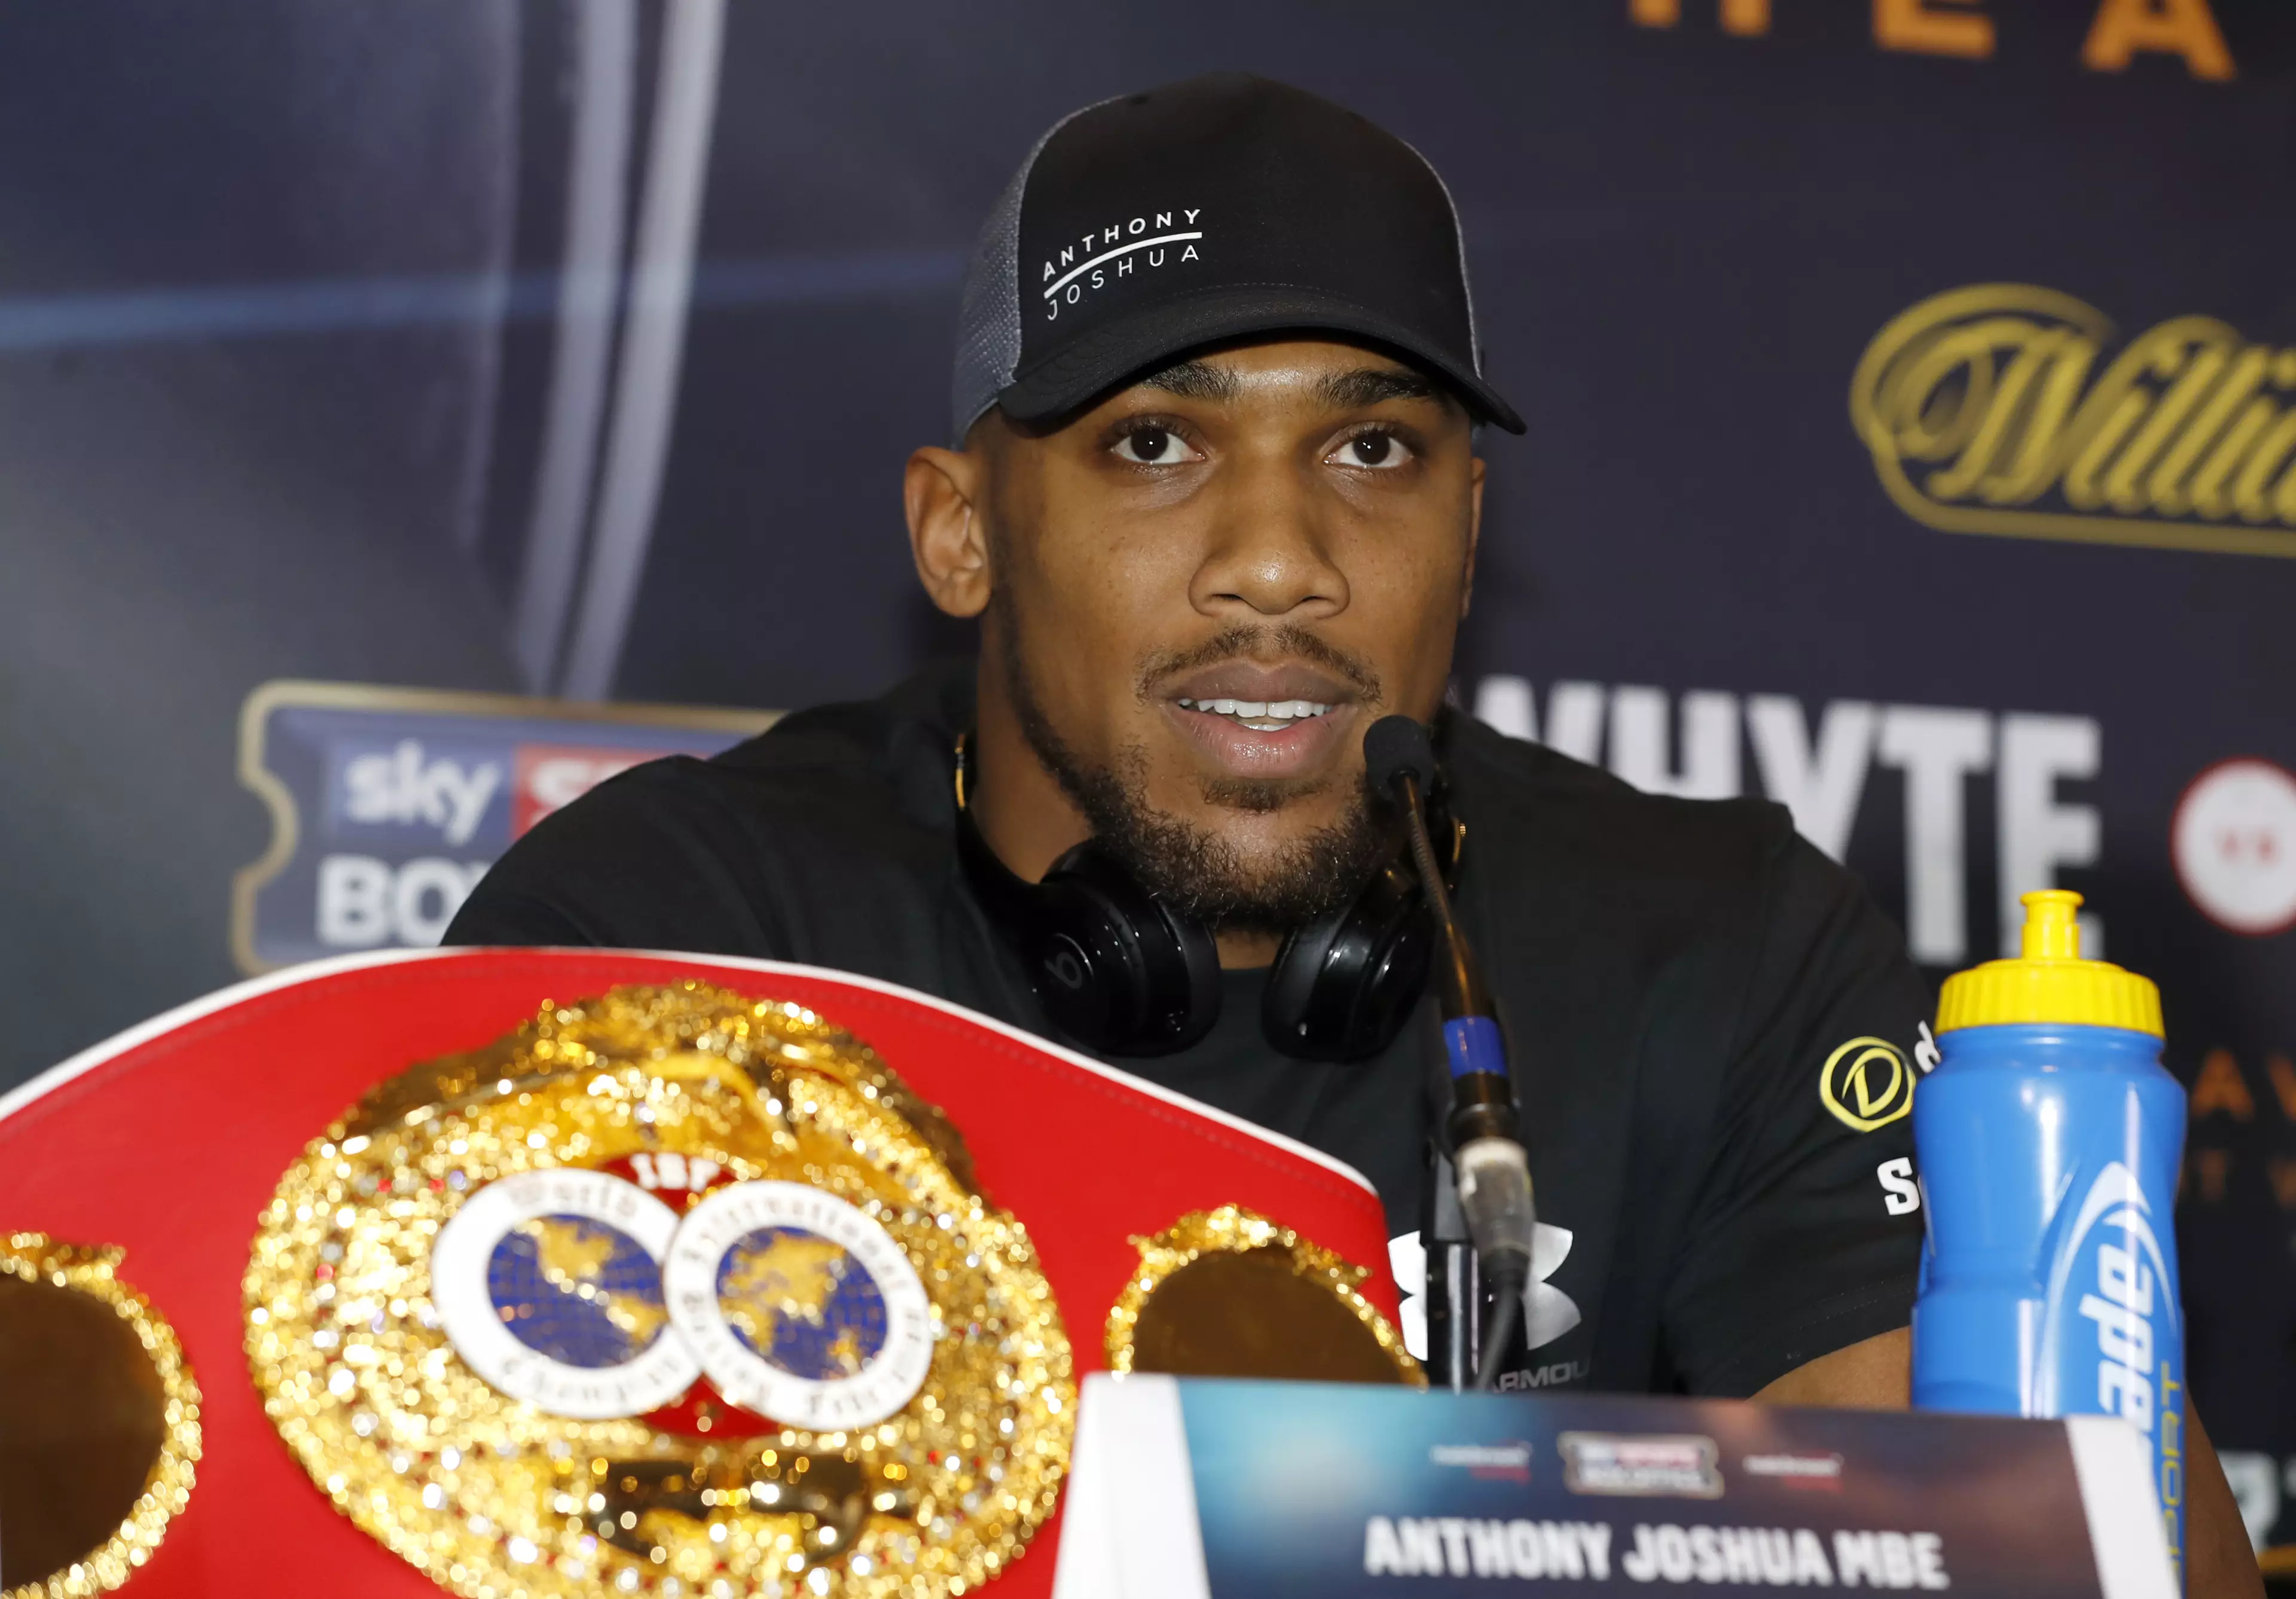 BREAKING: Anthony Joshua Defends IBF Heavyweight Title By Defeating Eric Molina